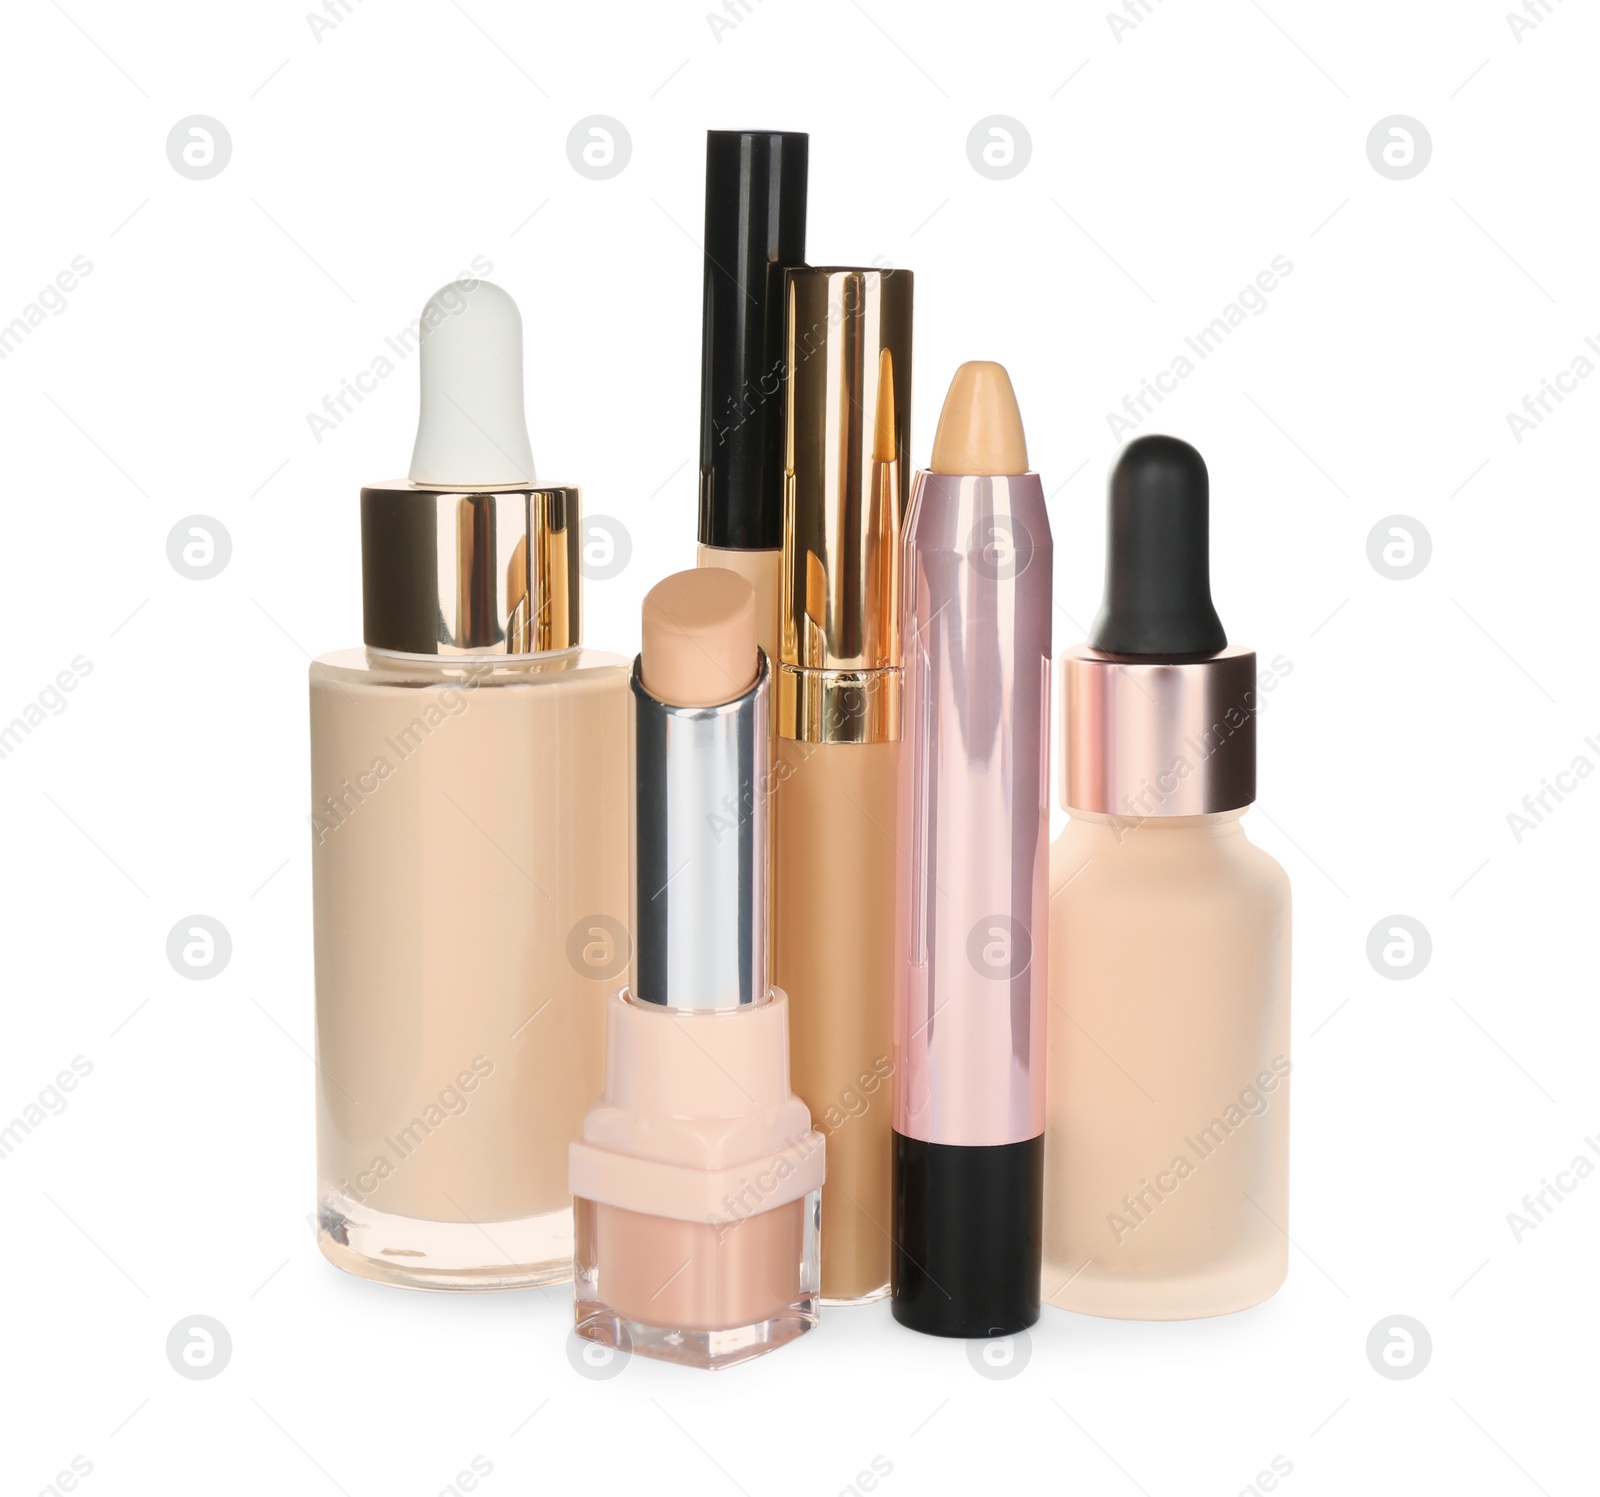 Photo of Foundation makeup products on white background. Decorative cosmetics